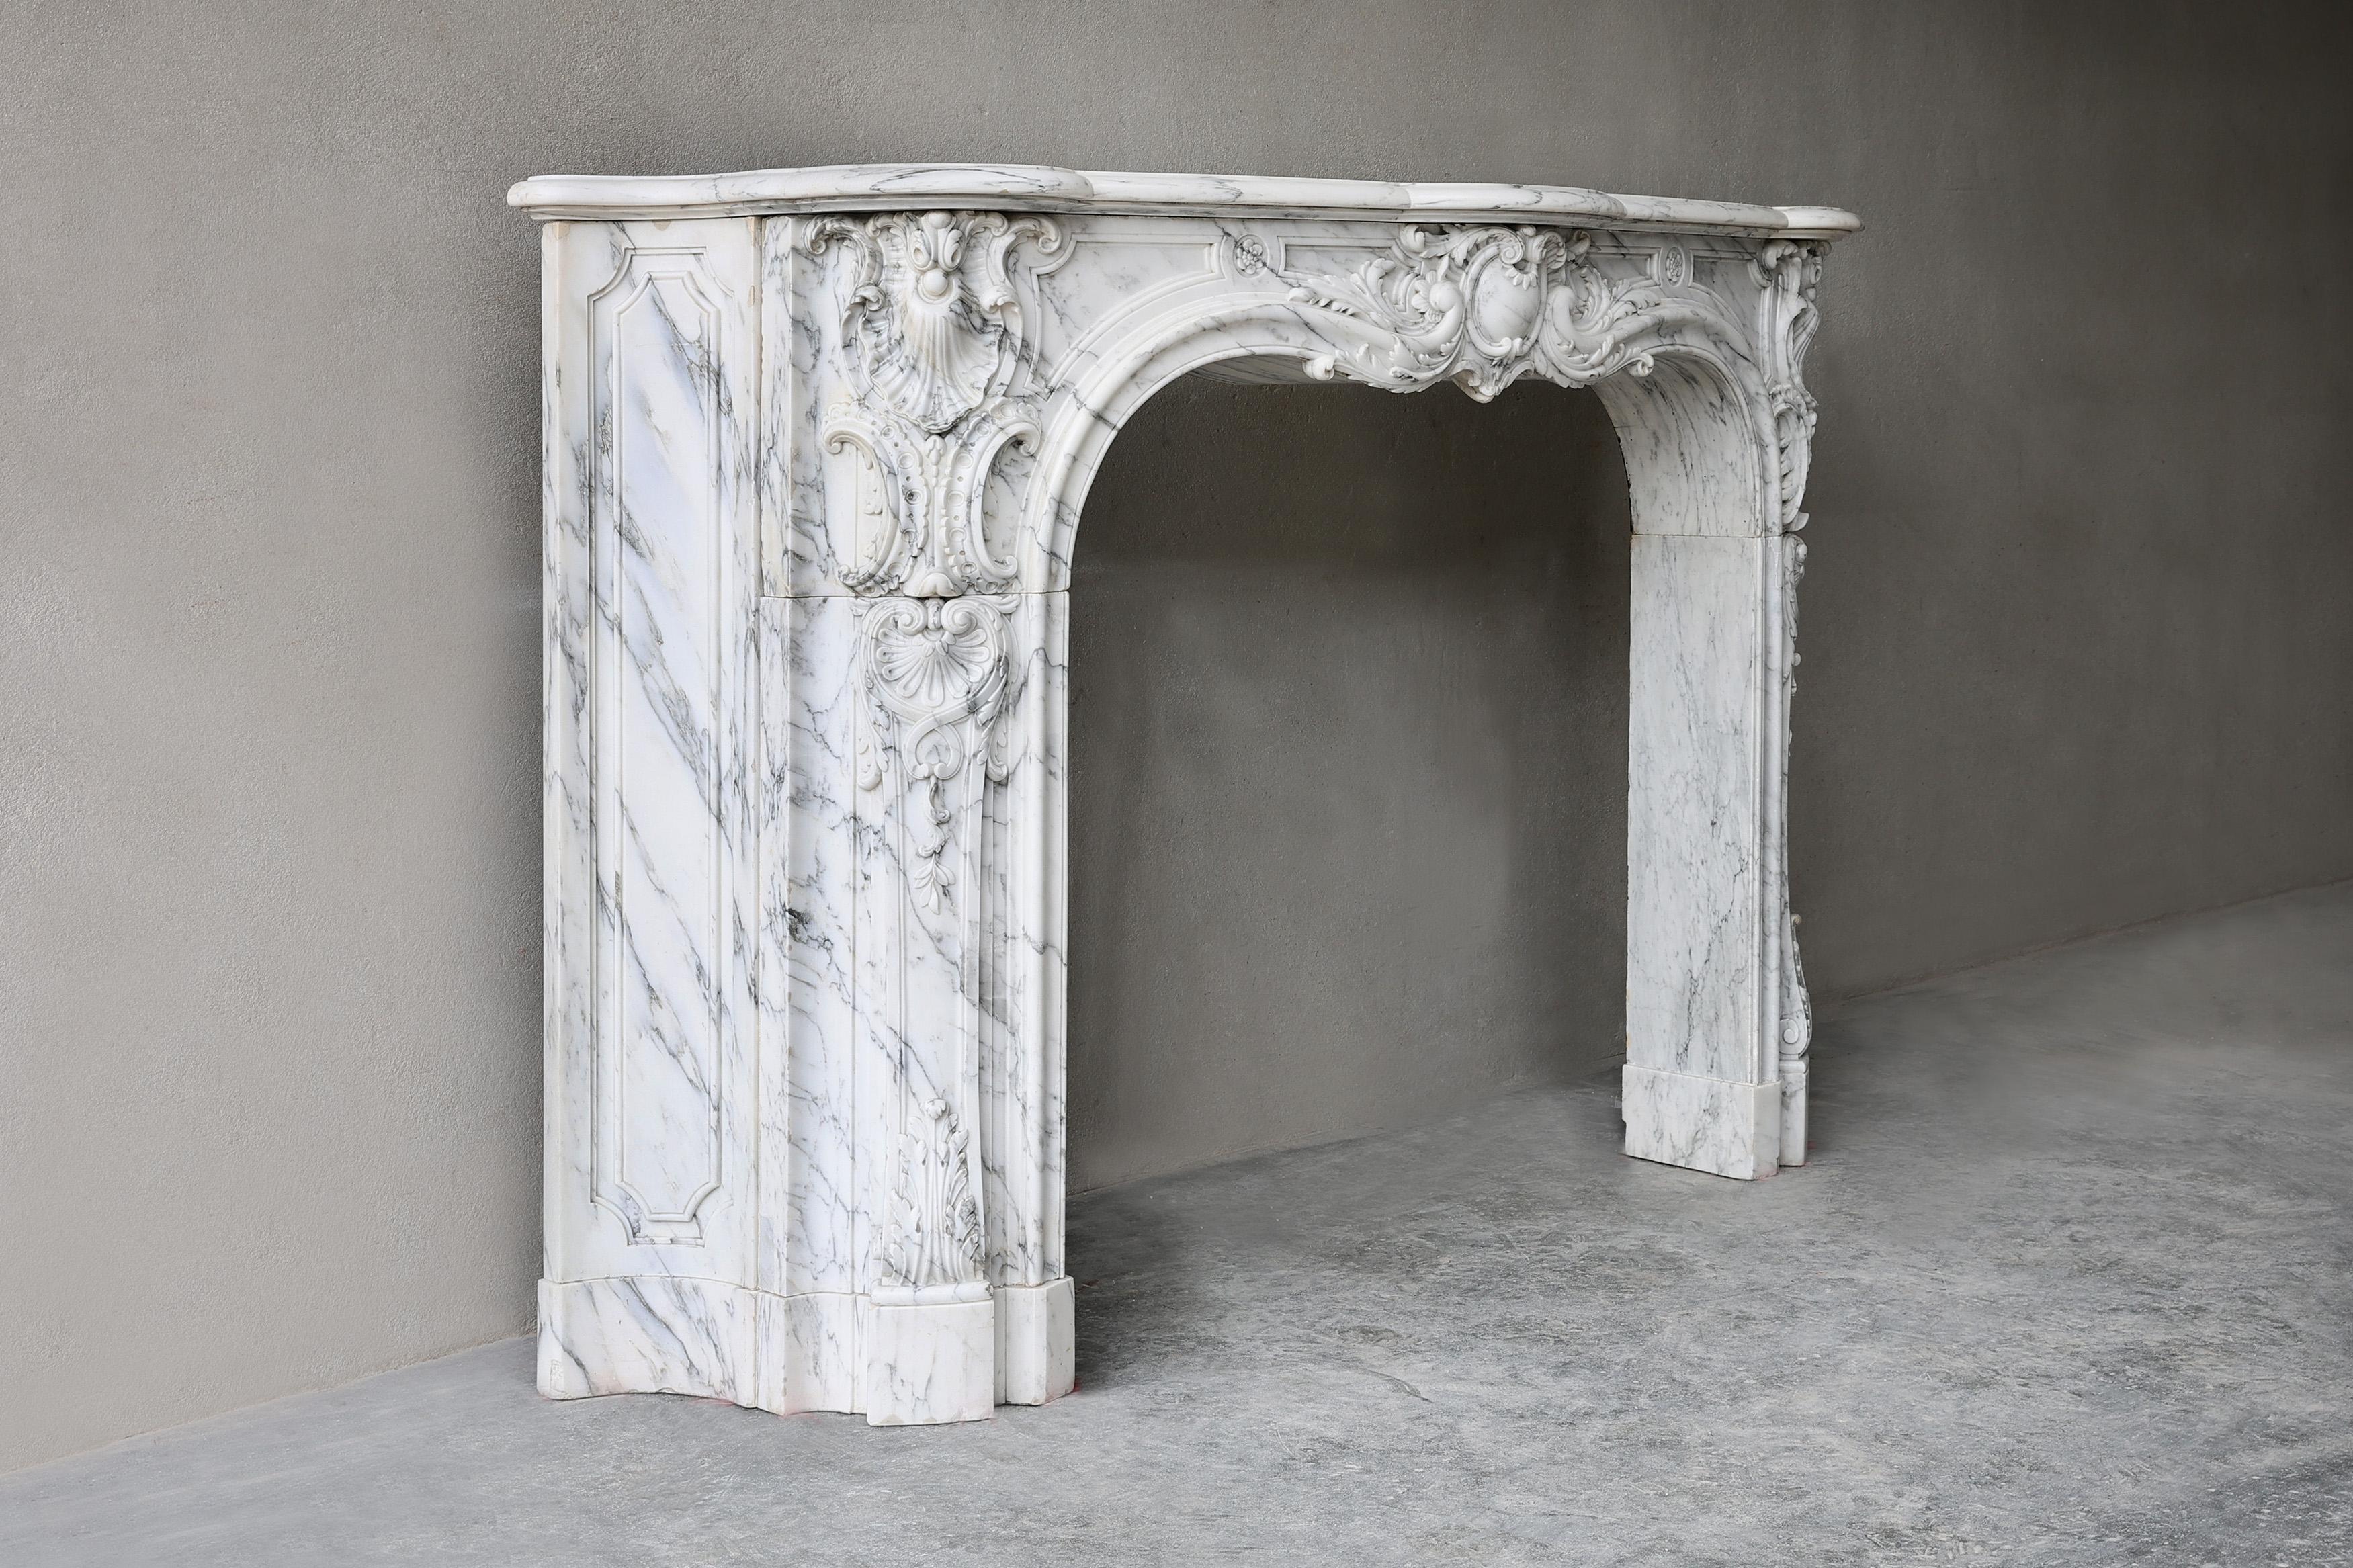 Exceptional, impressive and monumental 19th century antique fireplace surround in beautiful Arabescato marble. 
The carving is in superb quality showing the high standard and exceptional craftsmanship of its sculpturer. This unique antique